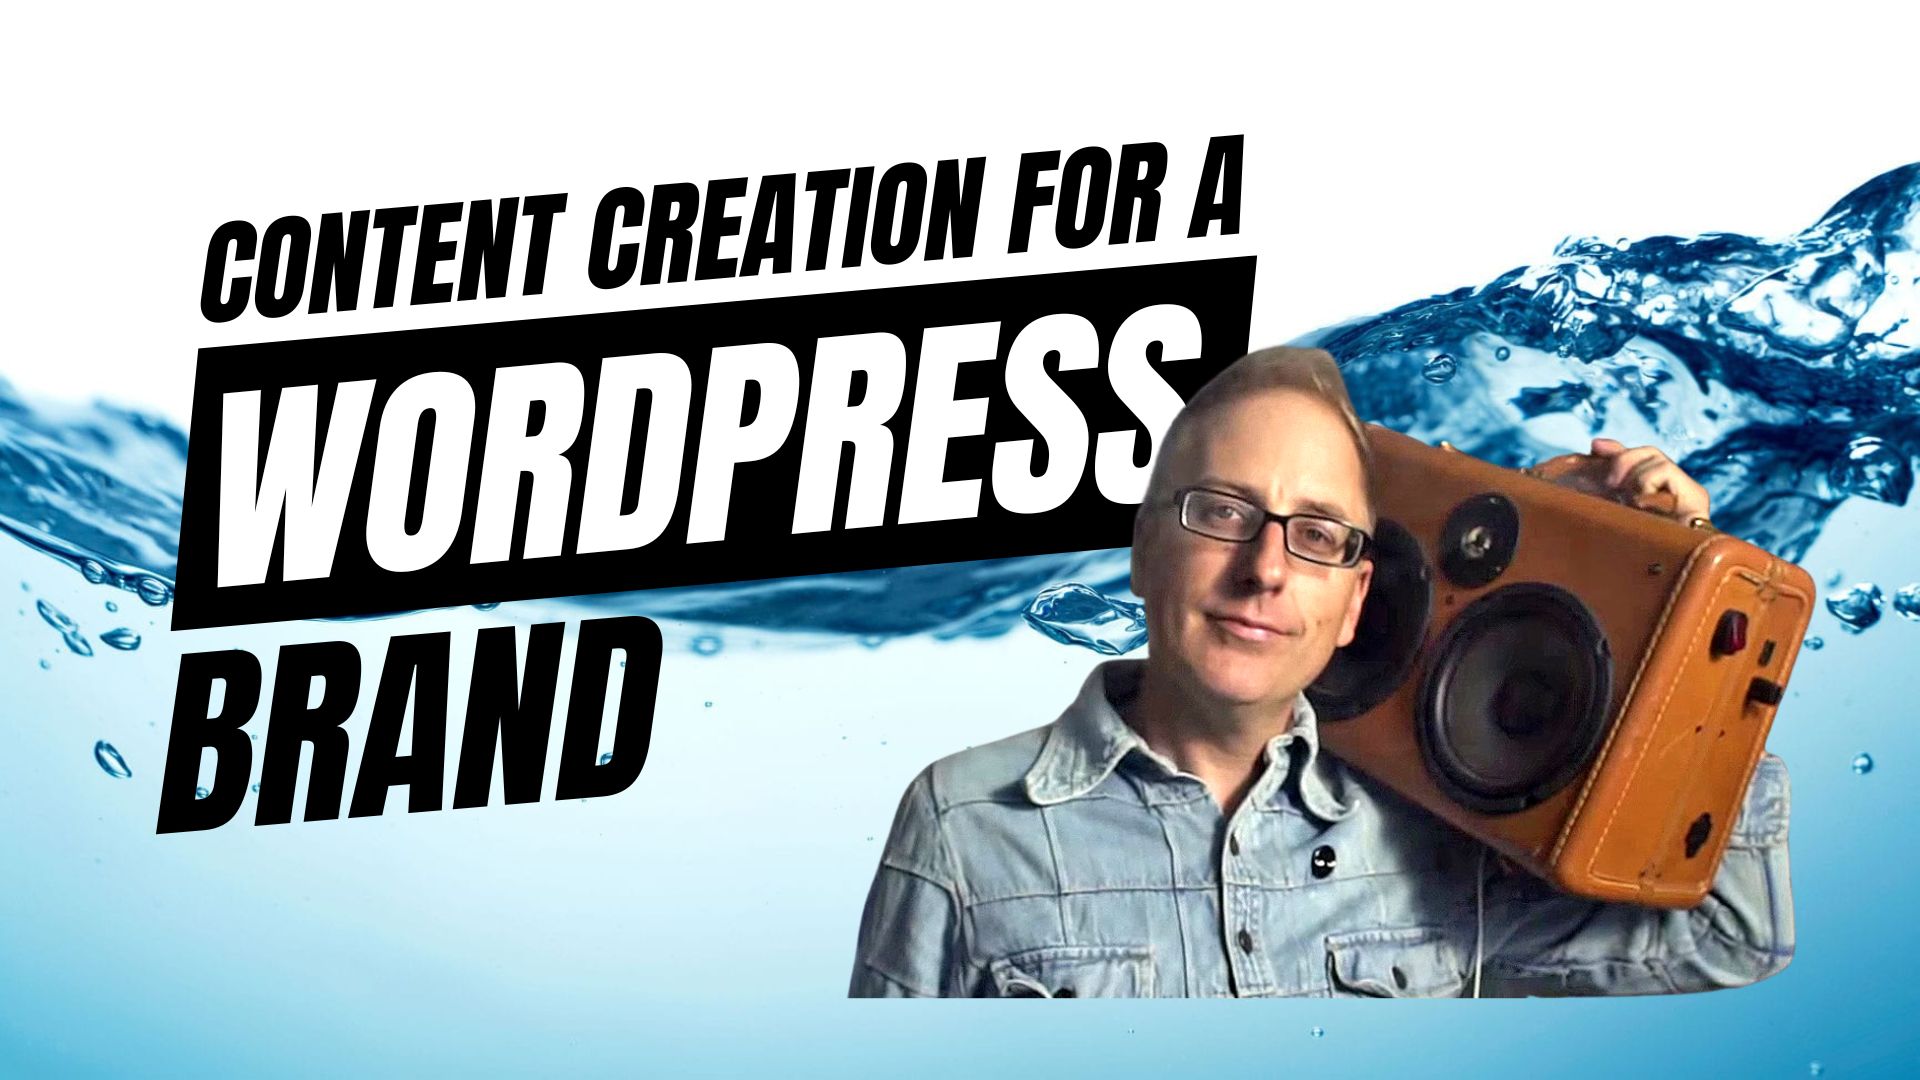 EP438 - Content Creation for a WordPress Brand